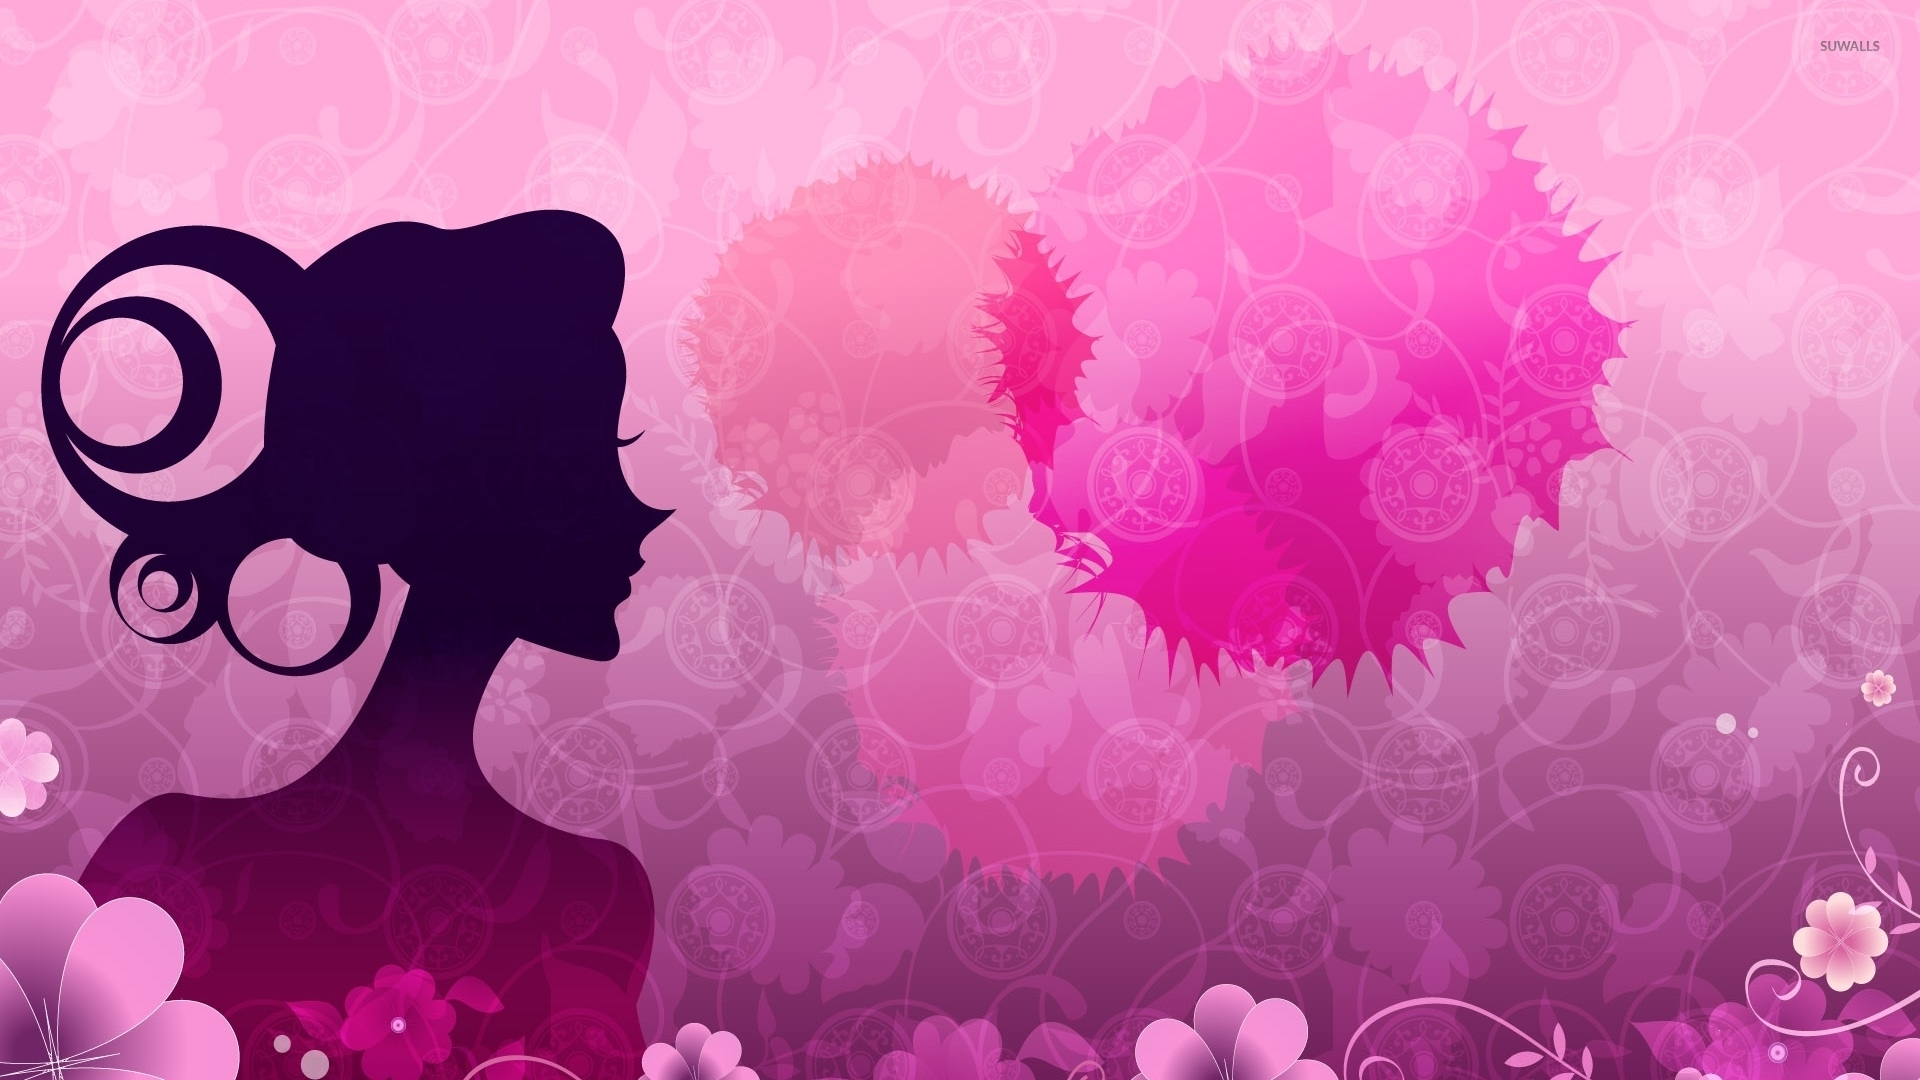 Woman silhouette by the pink flowers wallpaper - Vector wallpapers - #51391